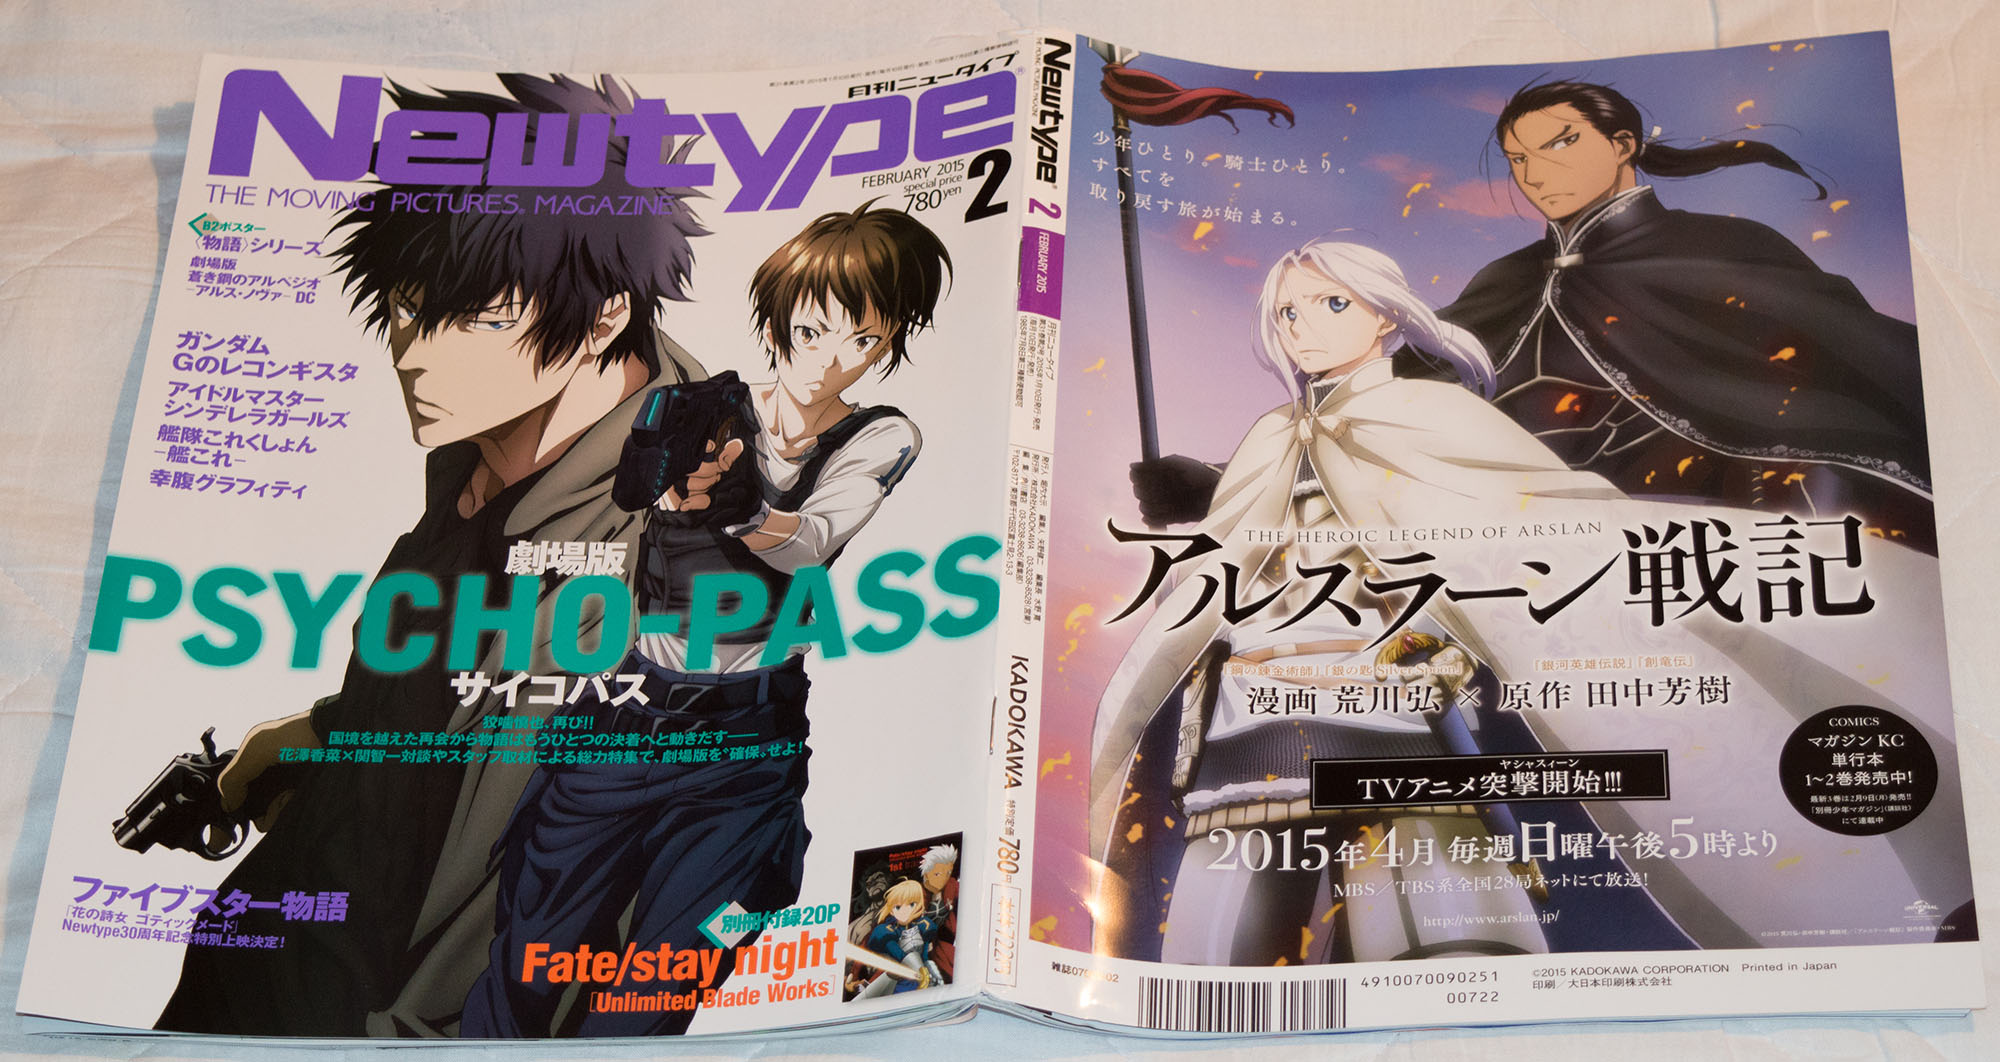 Haruhichan.com Newtype February 2015 Cover and Back